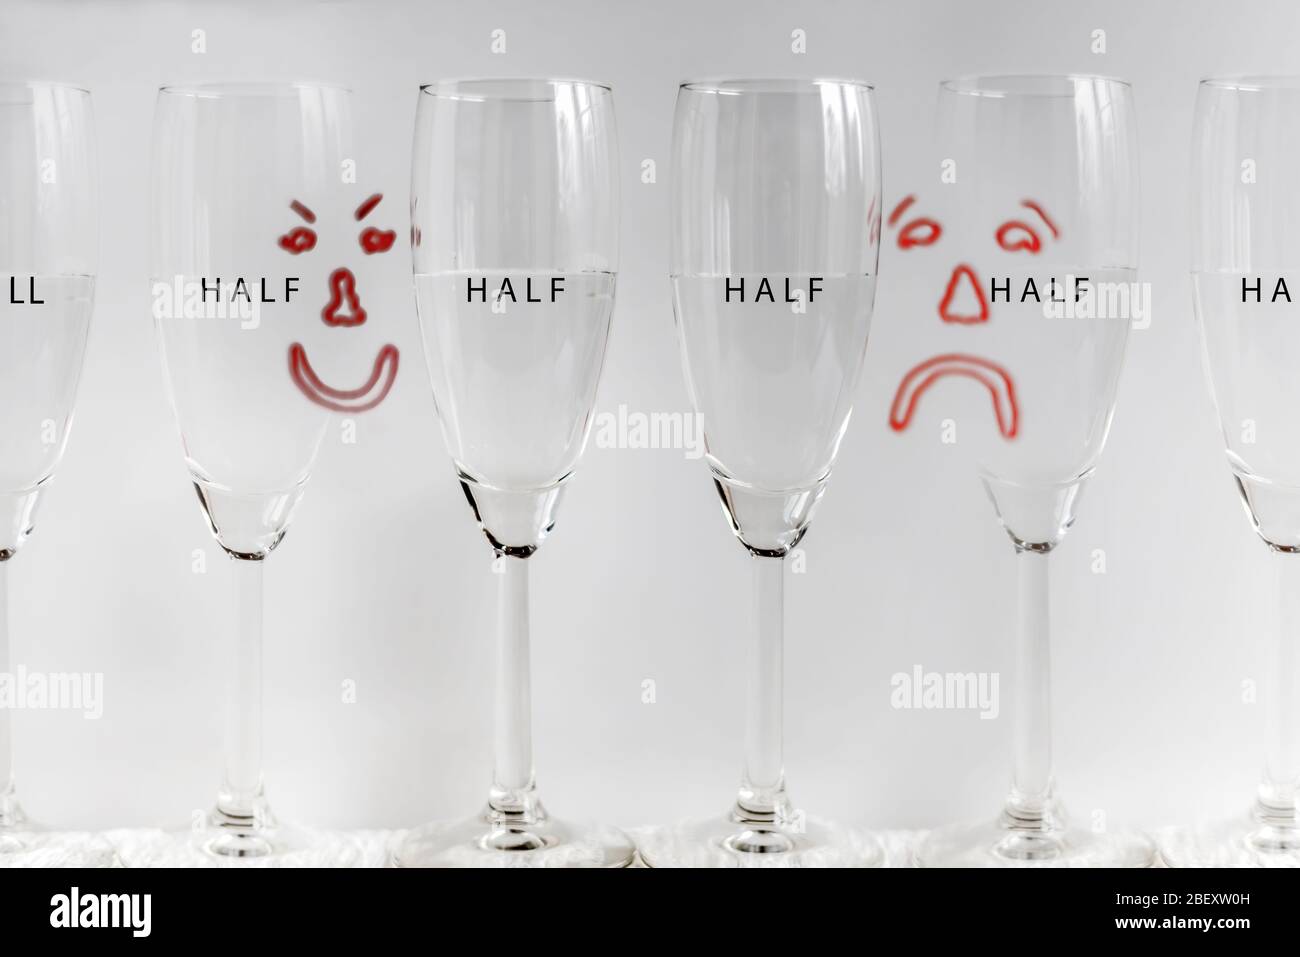 Six wine glasses, half full with drawn sad and happy faces in background depicting concept of glass half full, or glass half empty. Stock Photo